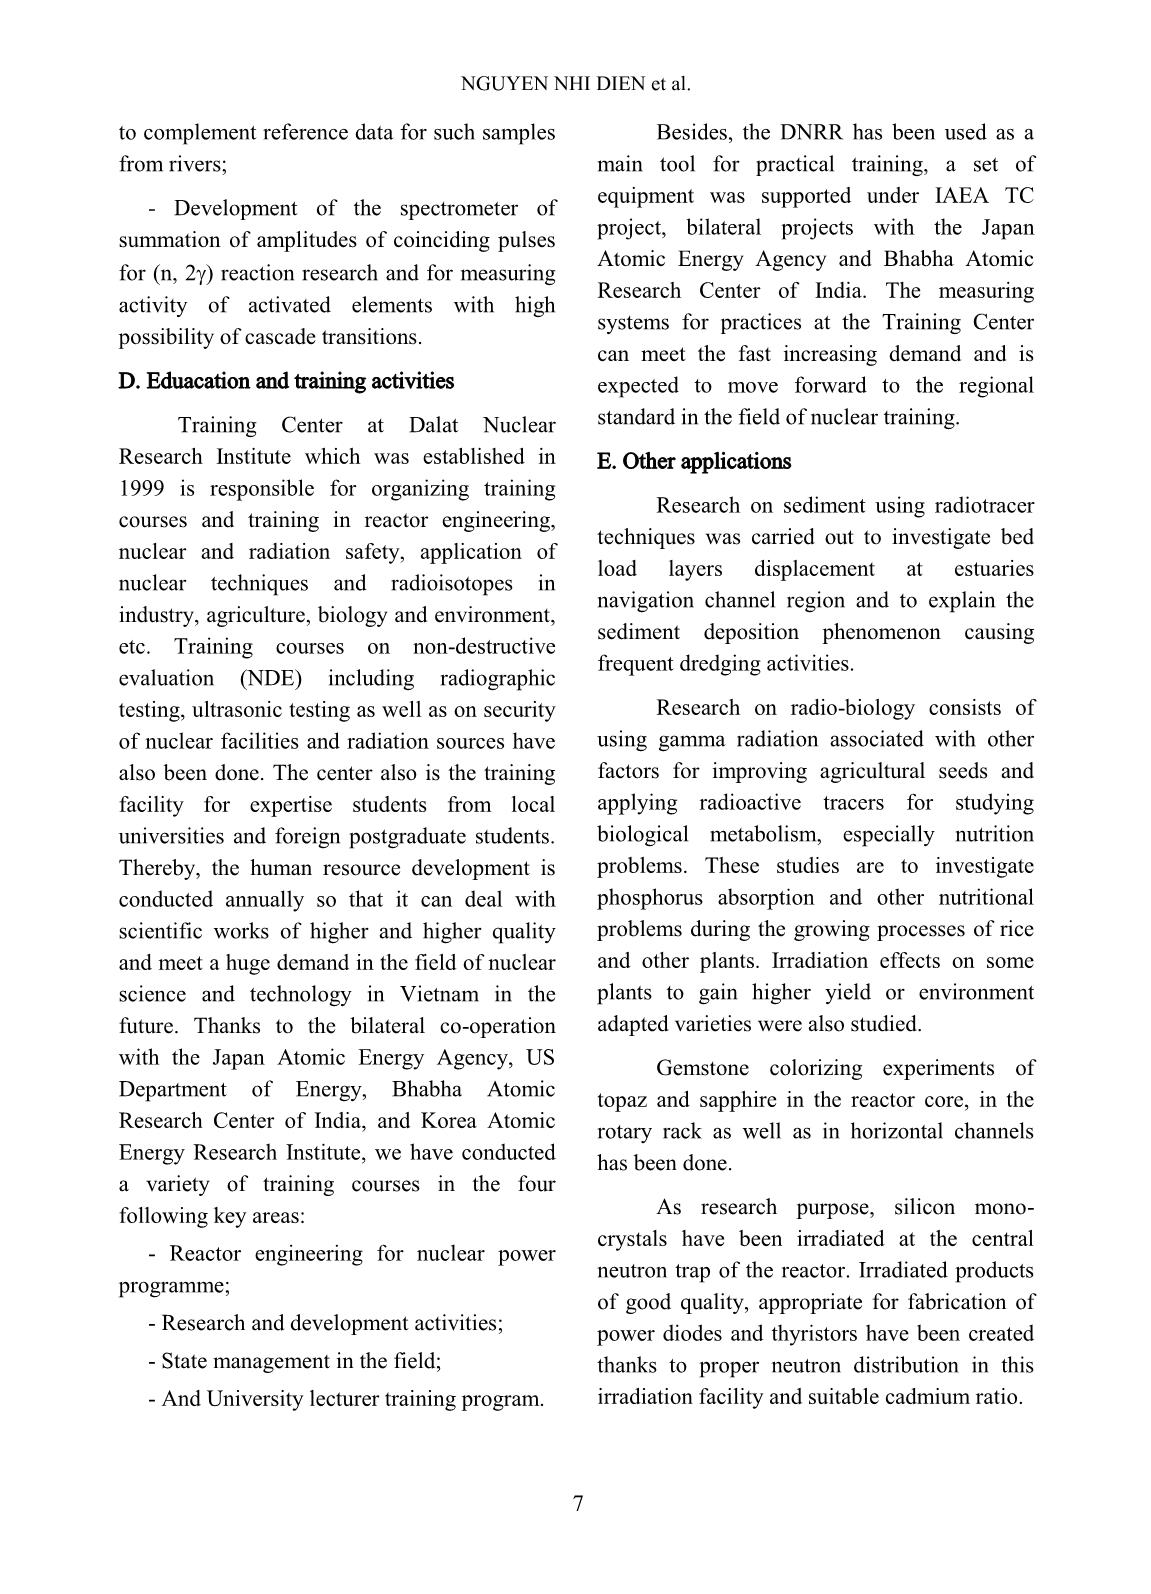 Nuclear Science and Technology - Volume 4, Number 1, March 2014 trang 10